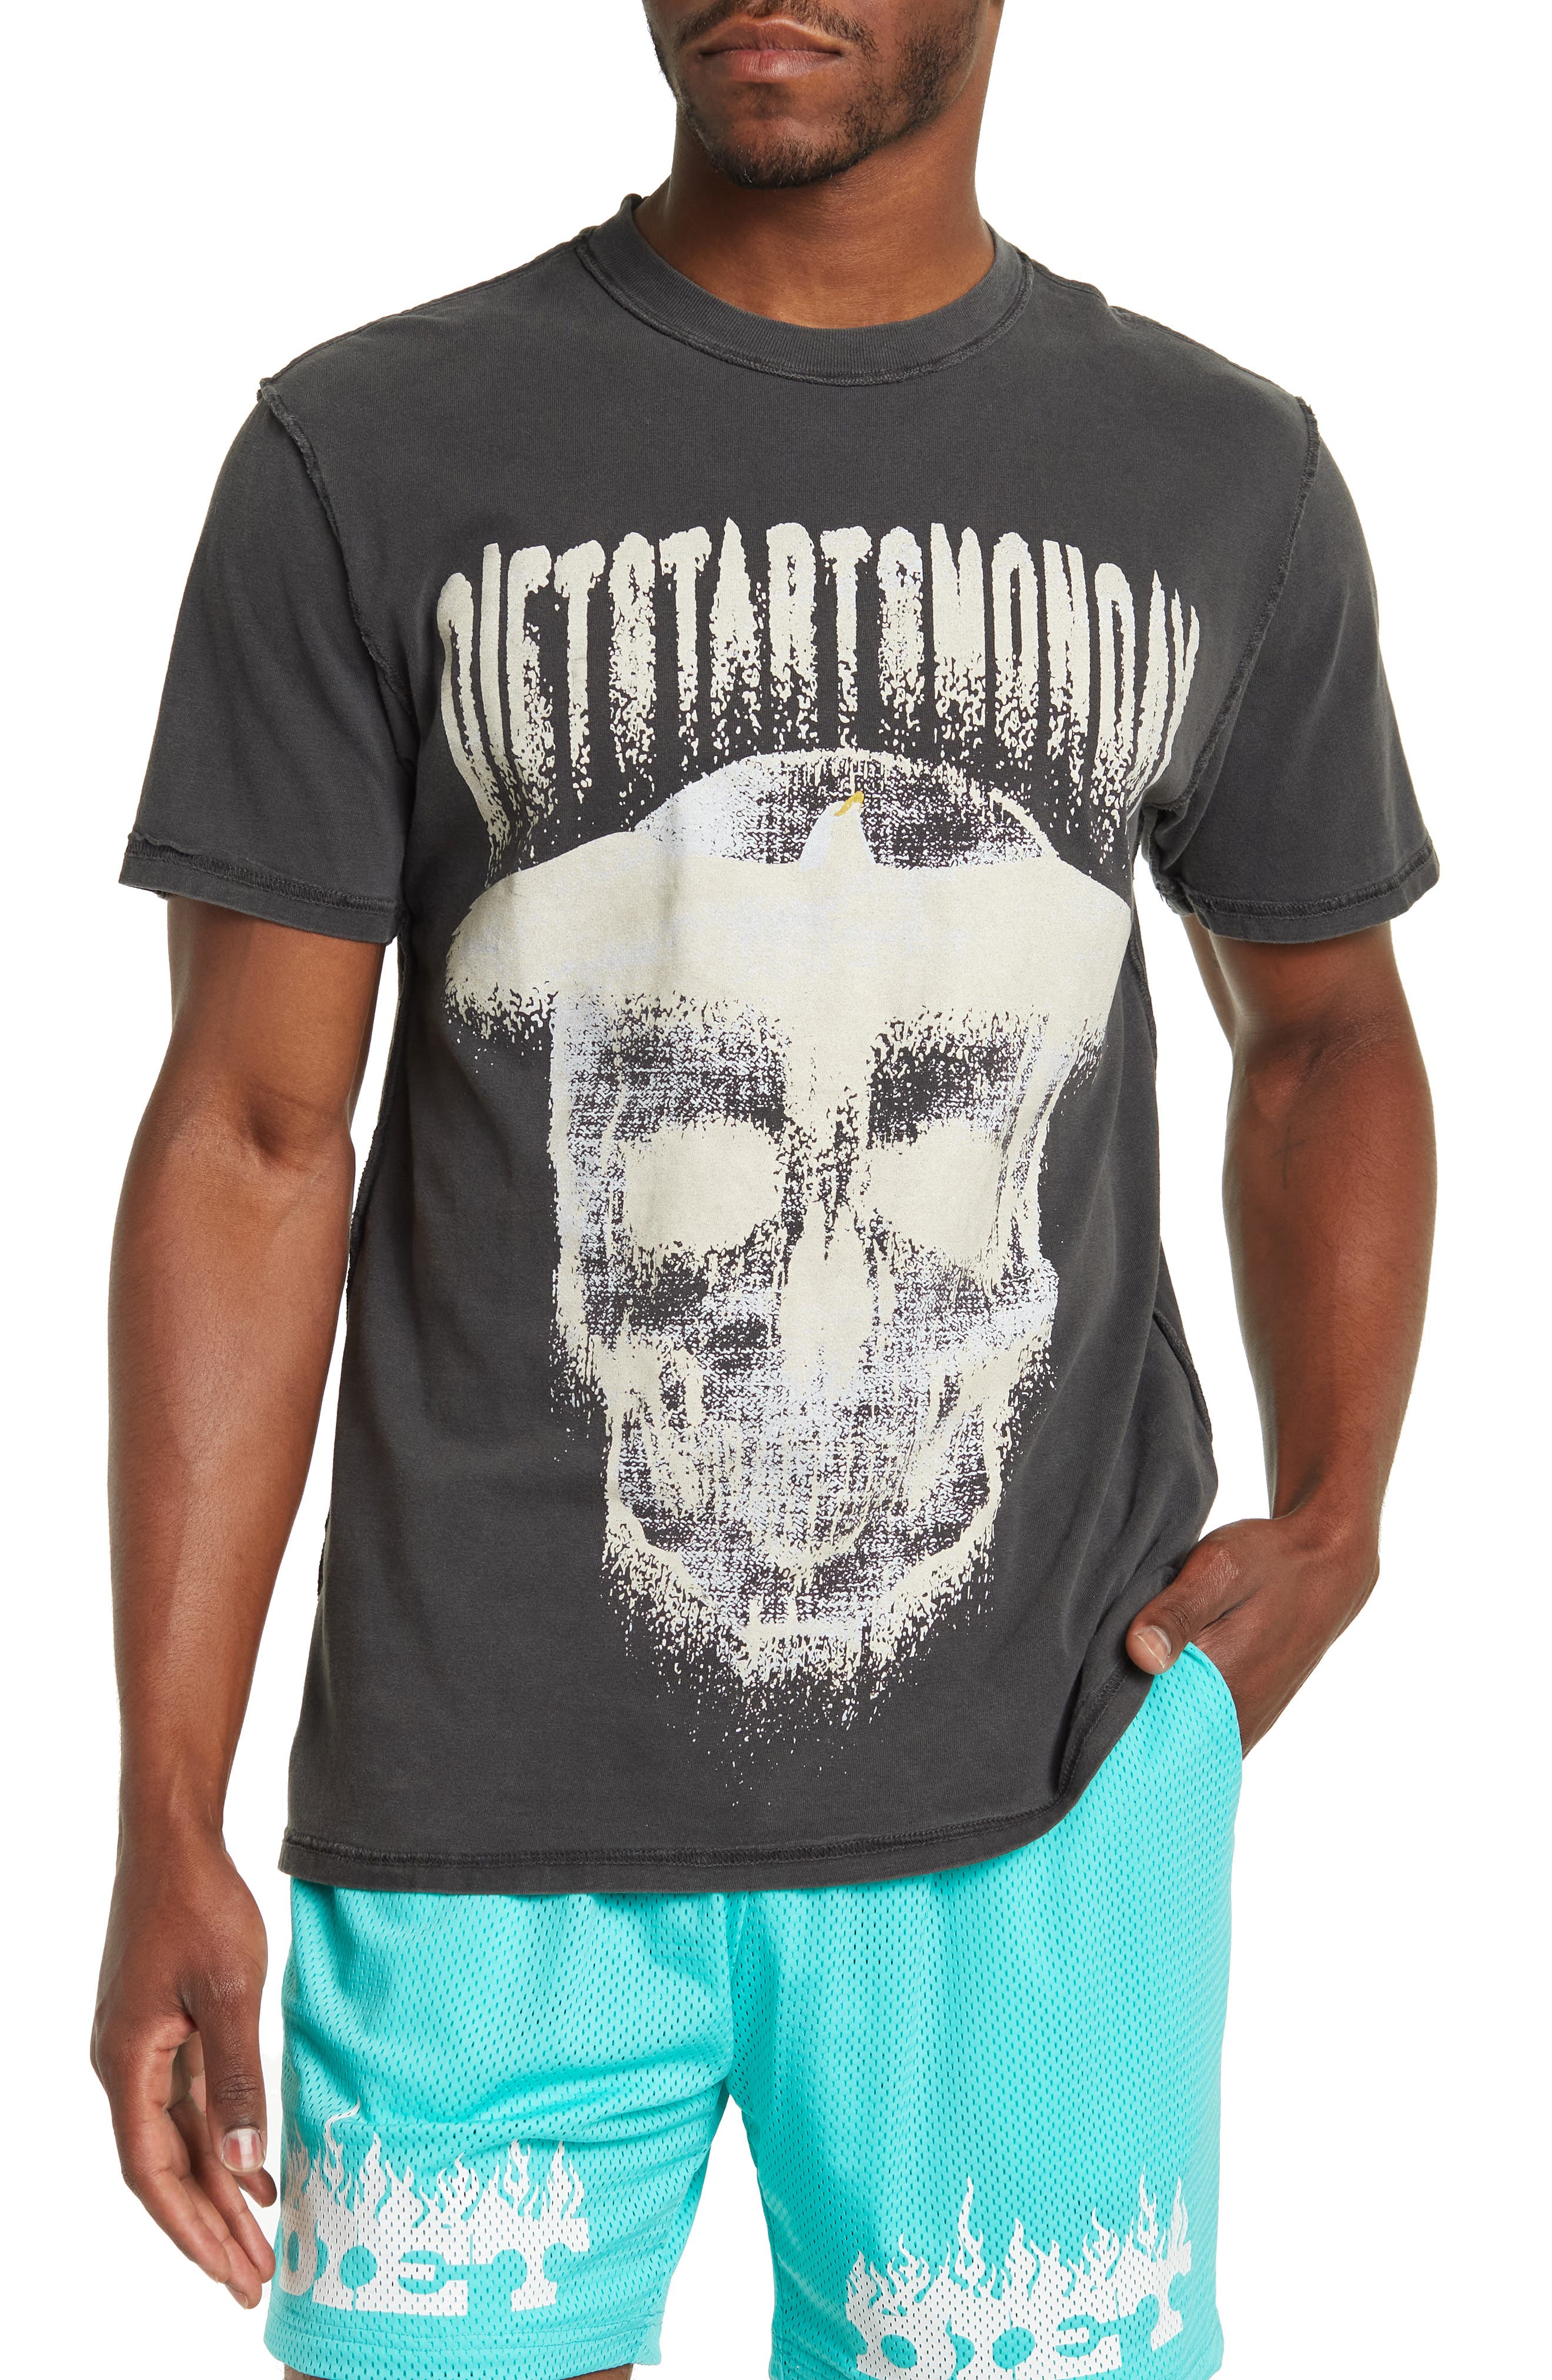 Diet Starts Monday Skull Graphic Tee In Antique Black At Nordstrom, Size X-large